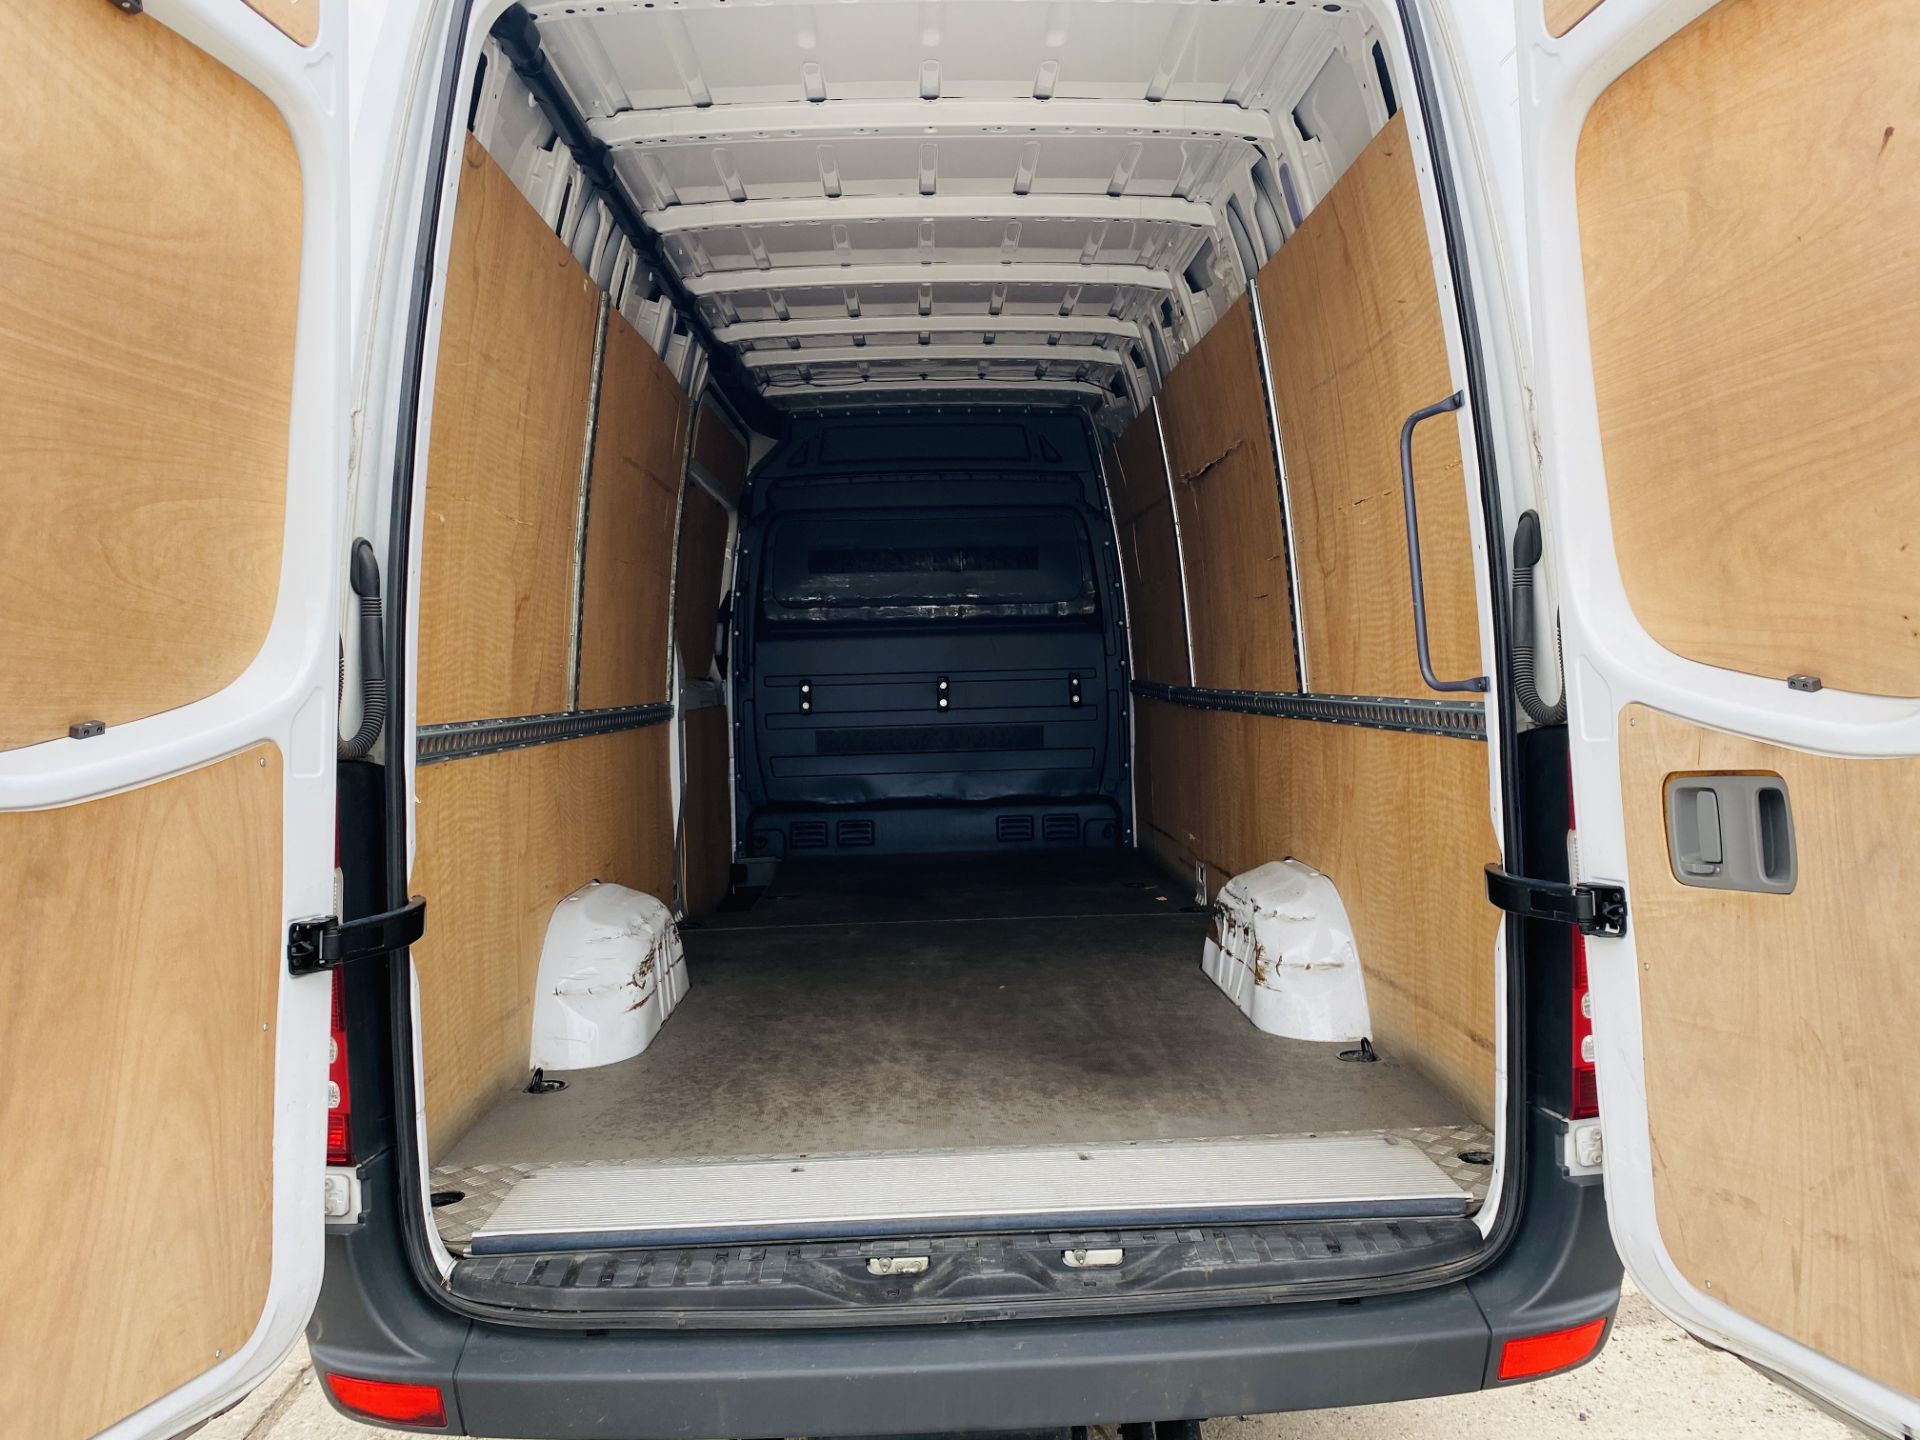 ON SALE MERCEDES SPRINTER 314CDI "LWB" HIGH ROOF WITH REAR ELECTRIC TAIL LIFT - 1 OWNER - FSH - Image 18 of 19